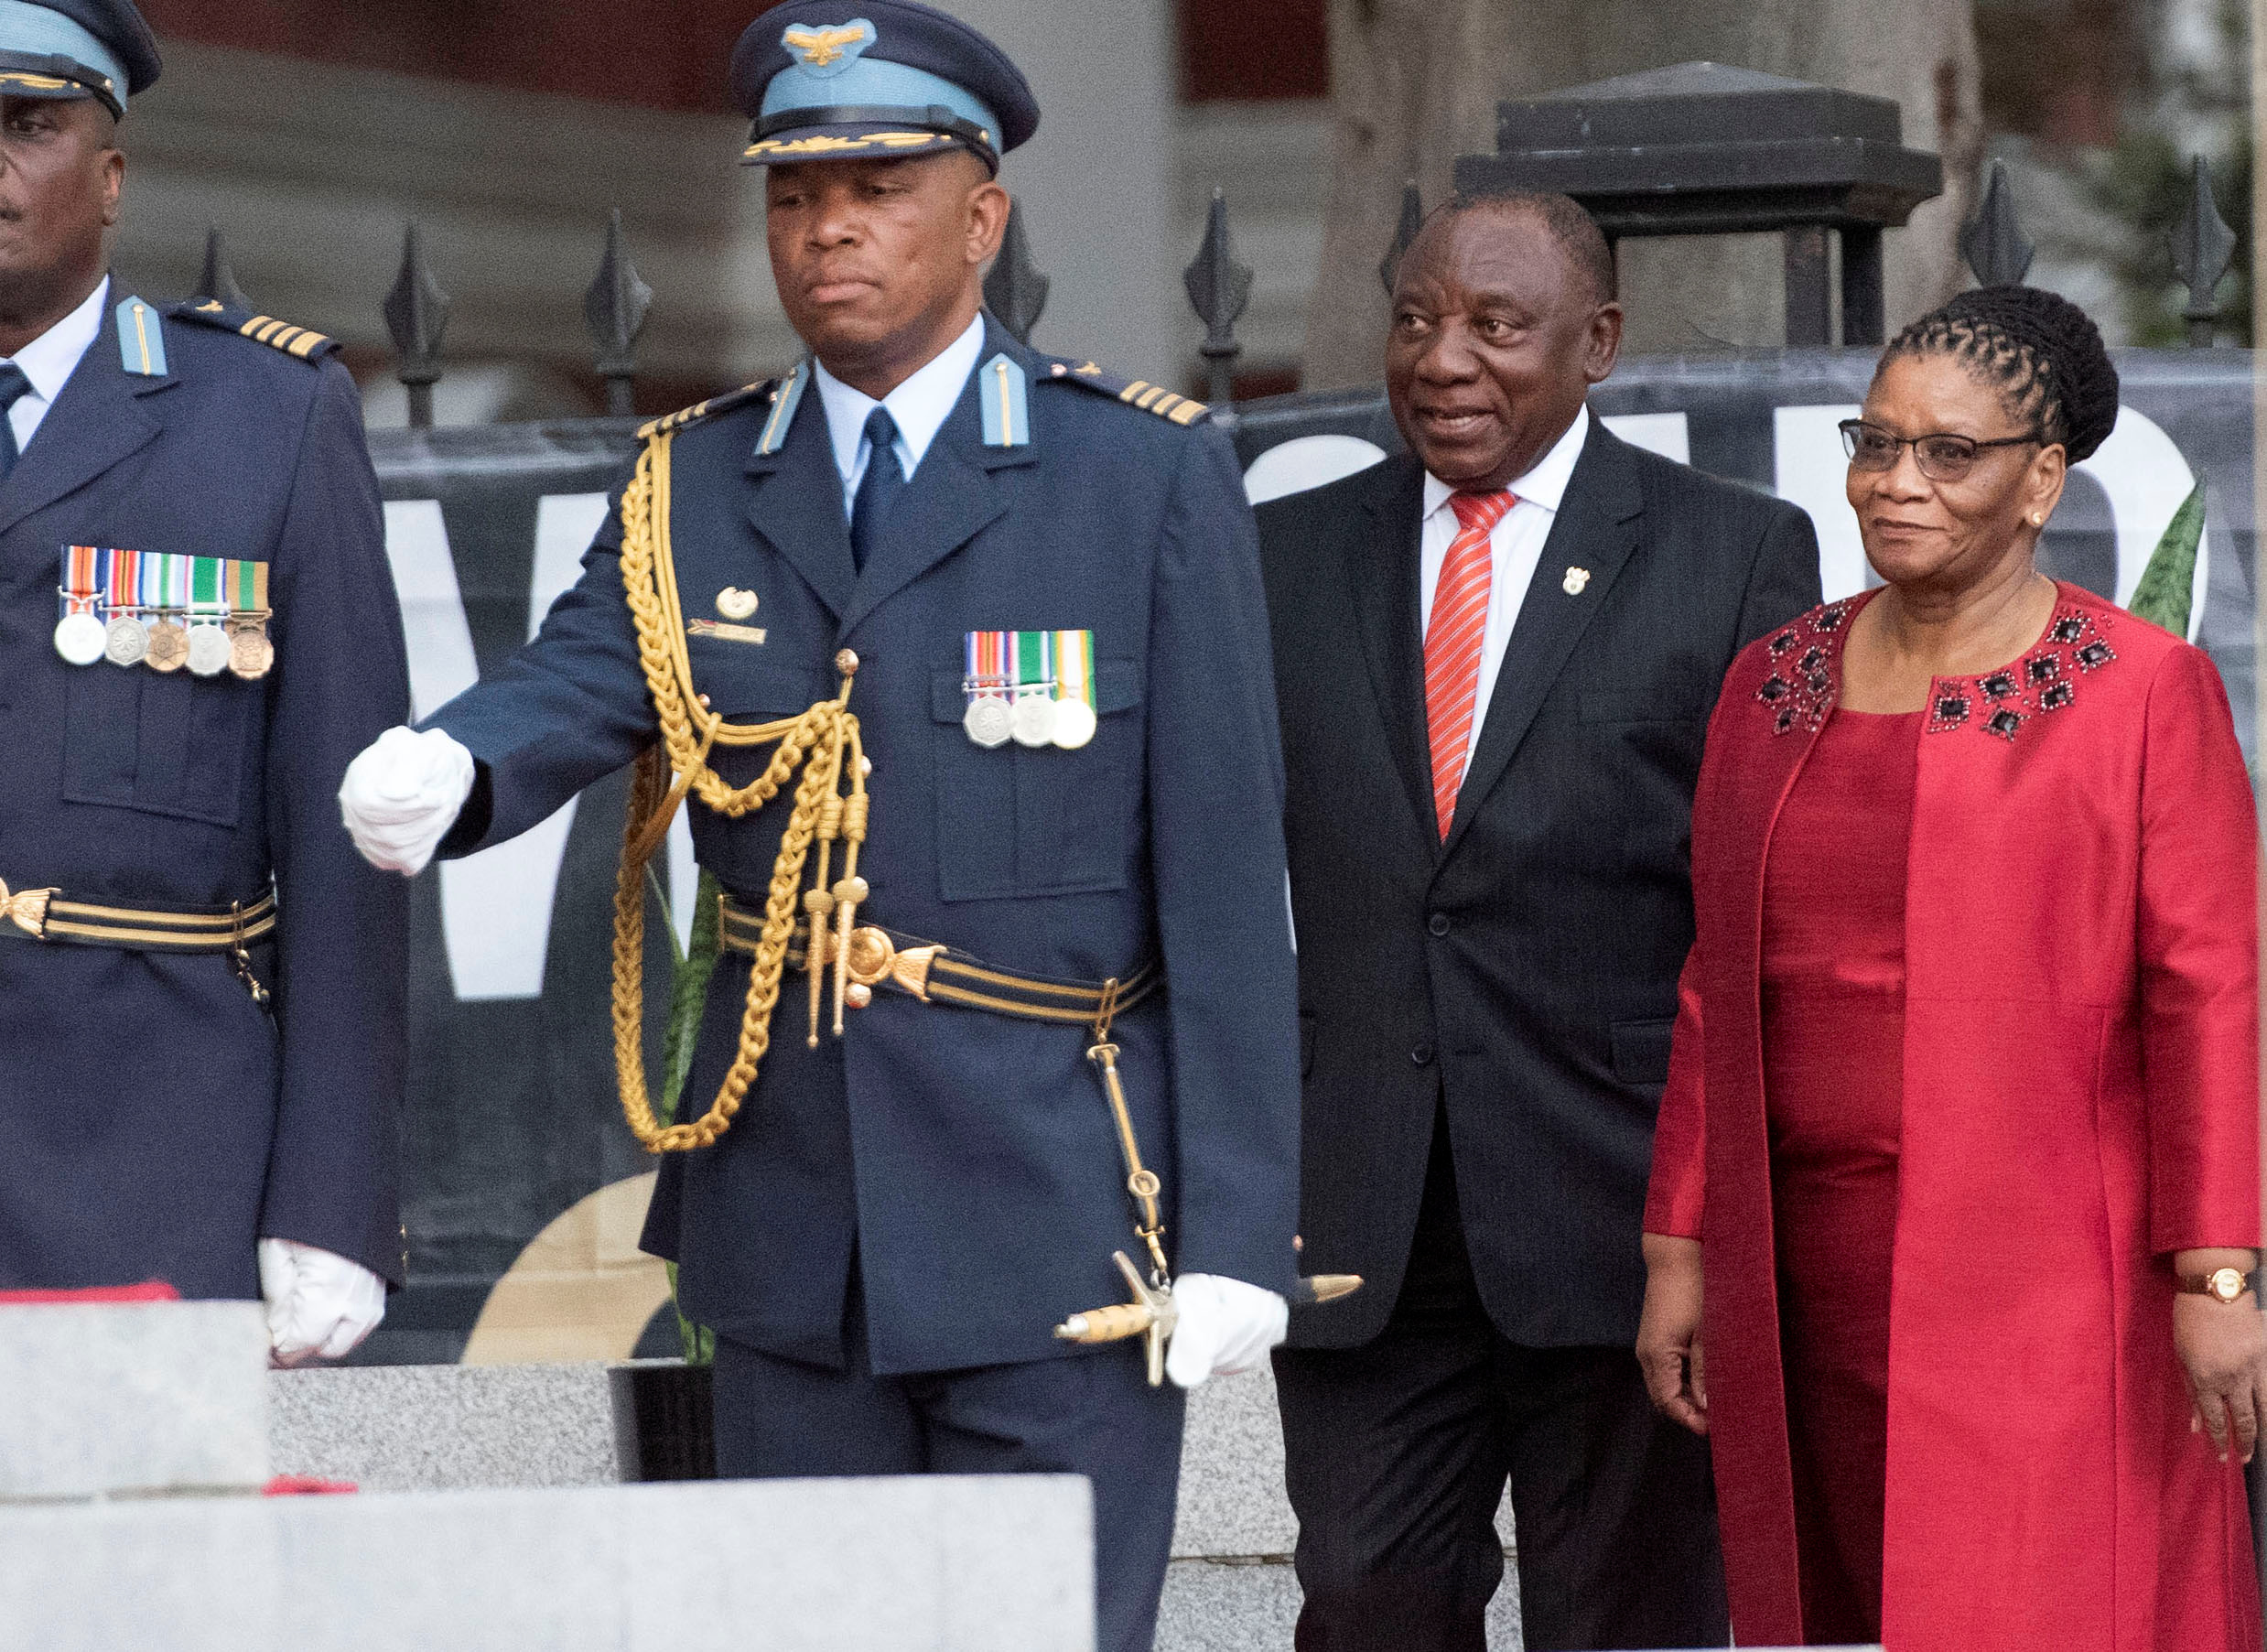 South African President Cyril Ramaphosa arrives with Thandi Modise, former Speaker of the National Assembly, to deliver his State of the Nation address at parliament in Cape Town, South Africa, February 13, 2020. Brenton Geach/Pool via REUTERS